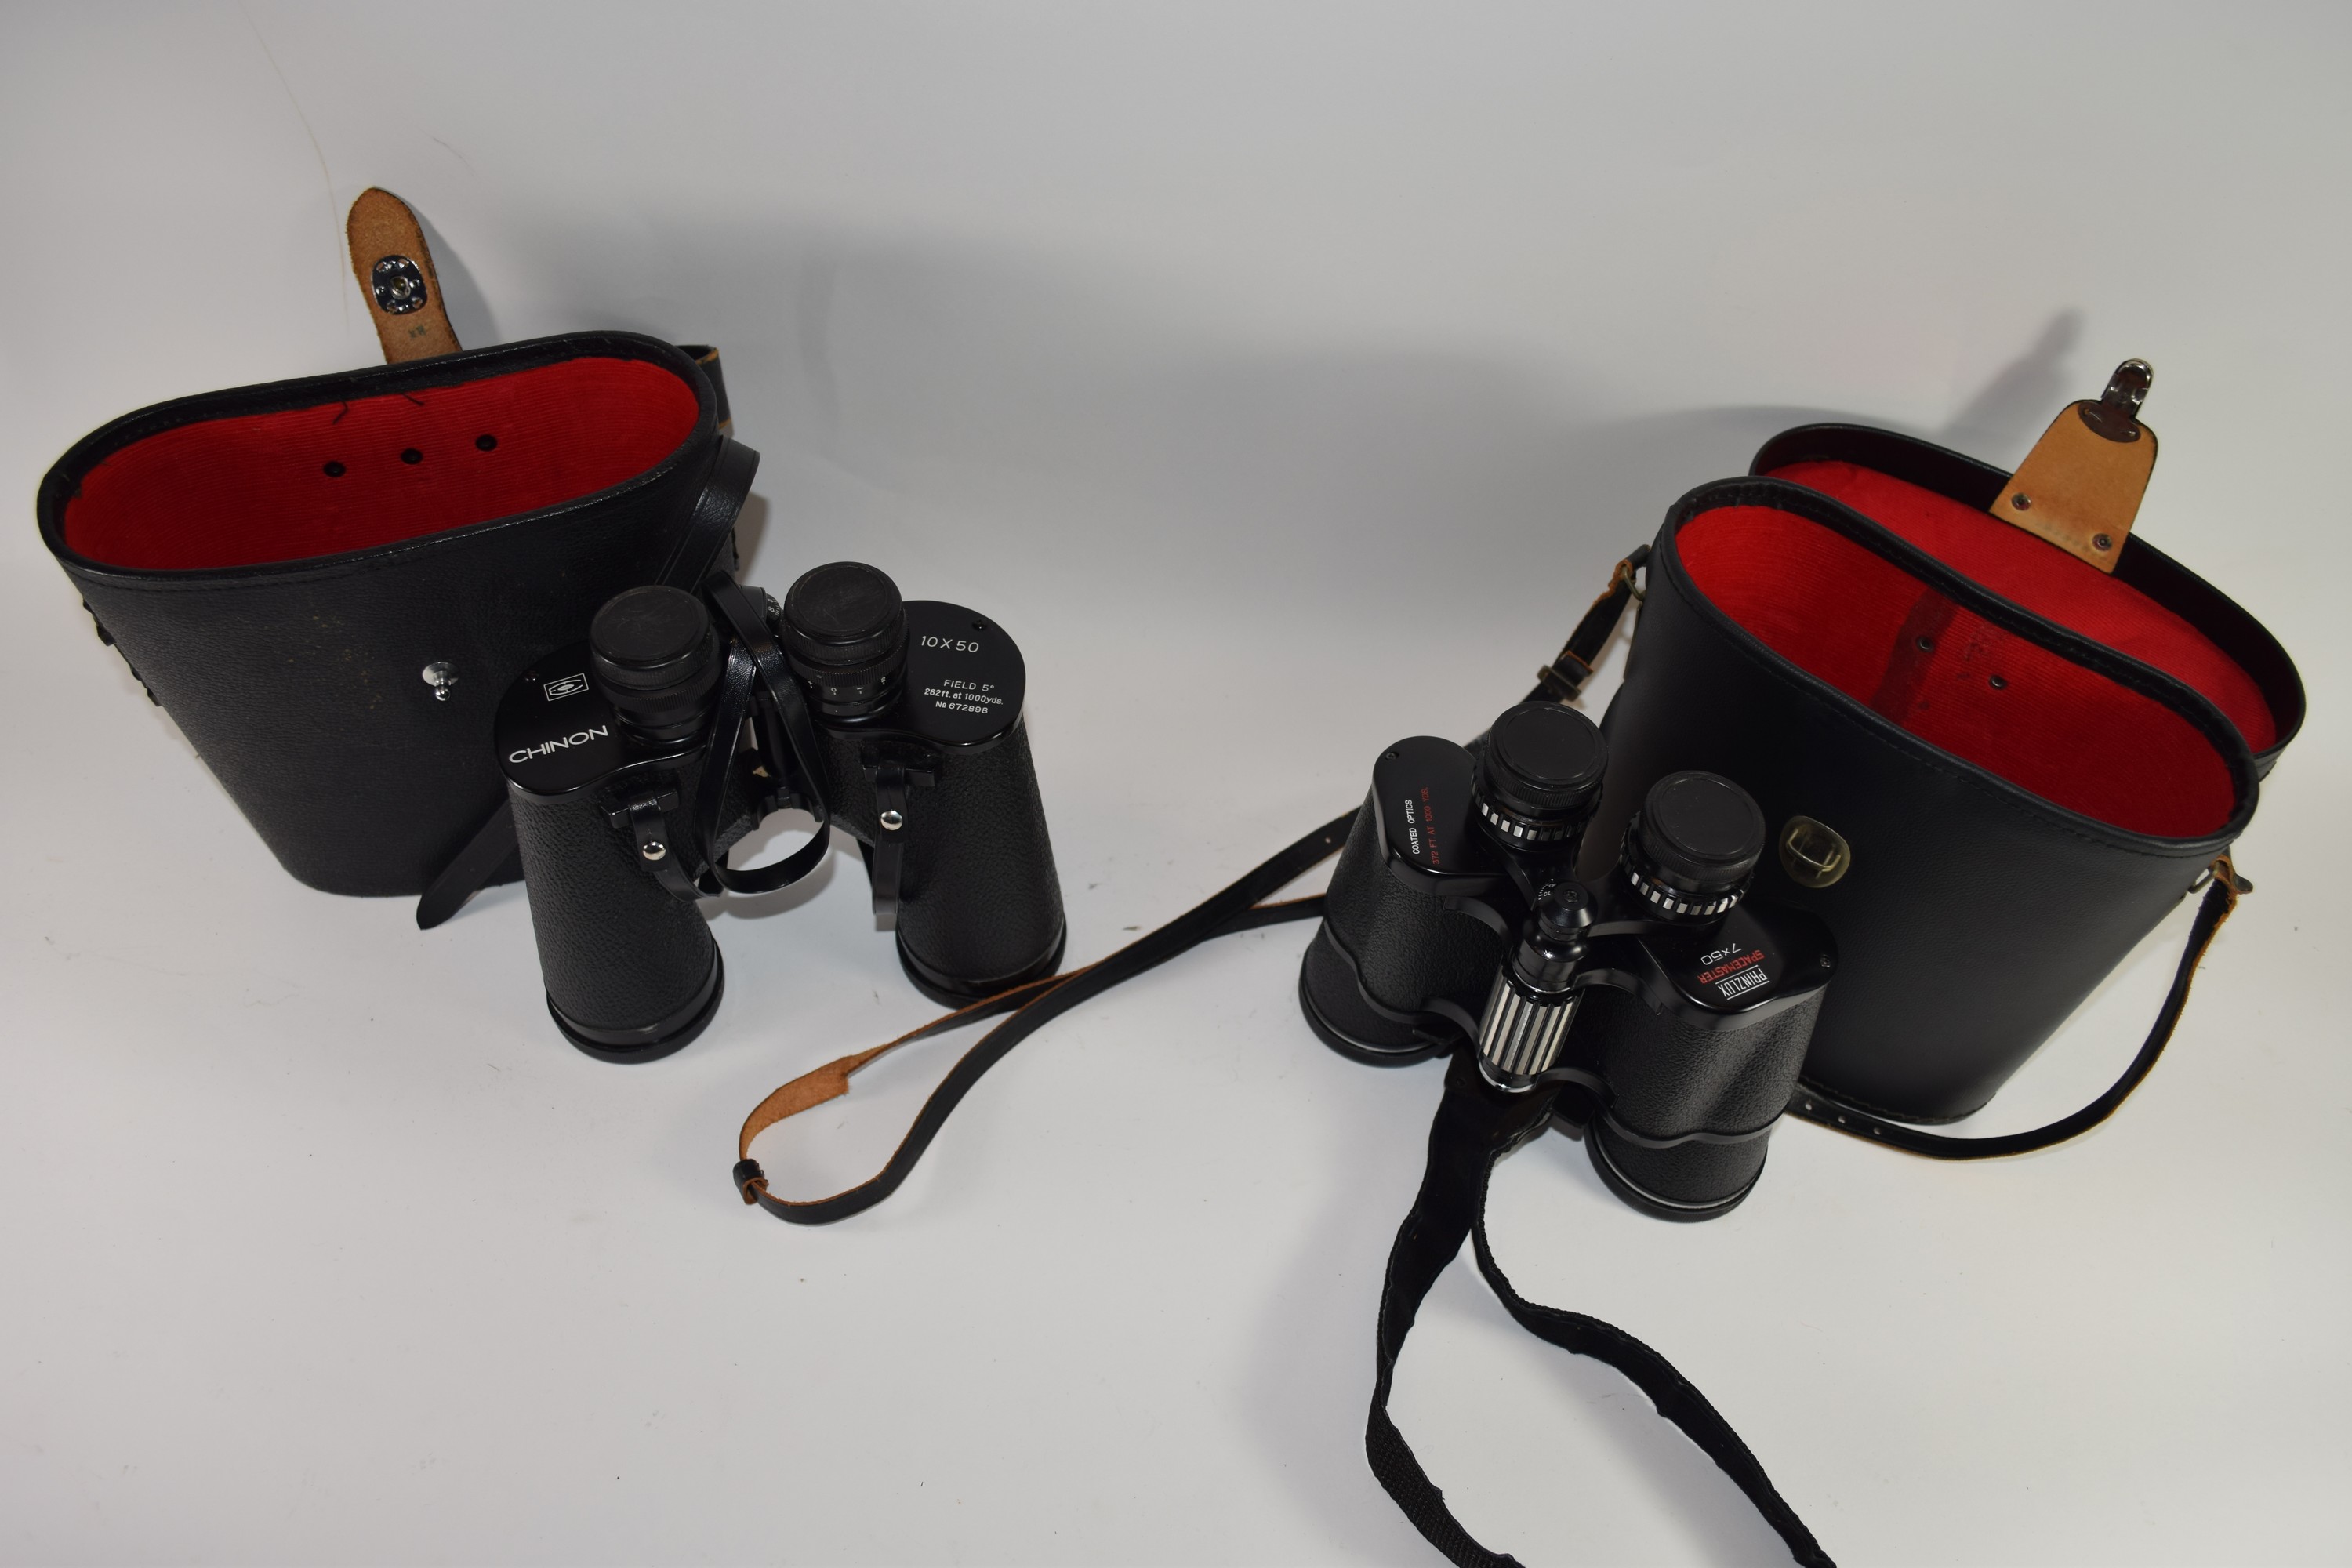 Two binoculars in cases, one manufactured by Chinon 10x50, the other by Prinzlux Spacemaster 7x50 ( - Image 2 of 2